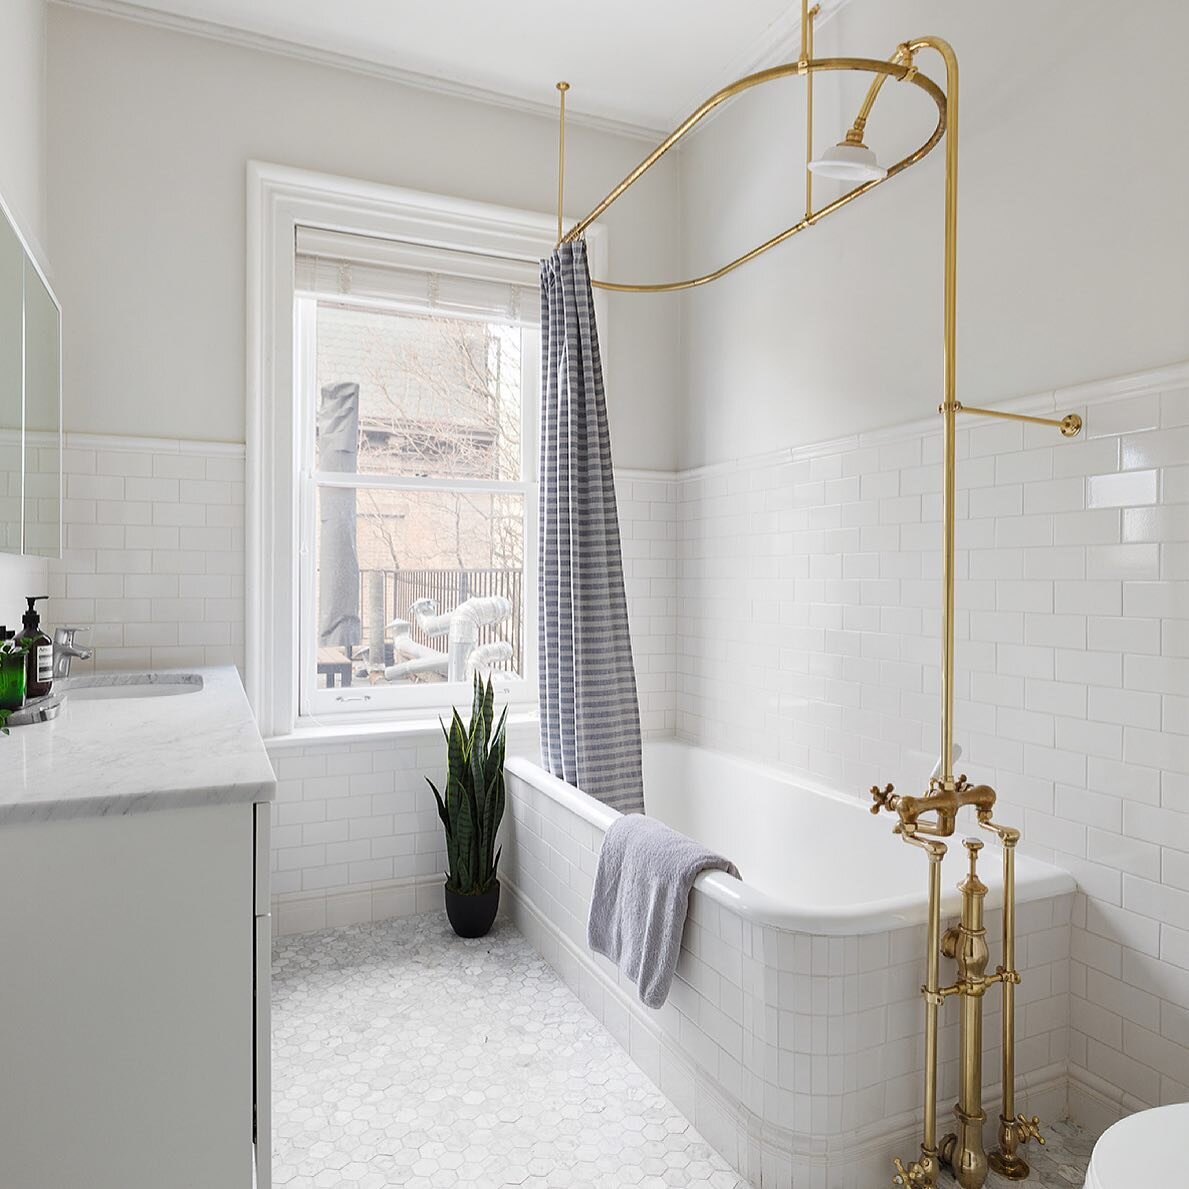 What's Your Favorite Winter Bath Time Ritual?  Share in the comments below. ✍️
.
Calgon take me away moments brought to you by our latest Brooklyn townhouse project. 🗝
.
338 Clinton Avenue Apt 4 is a townhouse floor through 2 bedroom with perfectly 